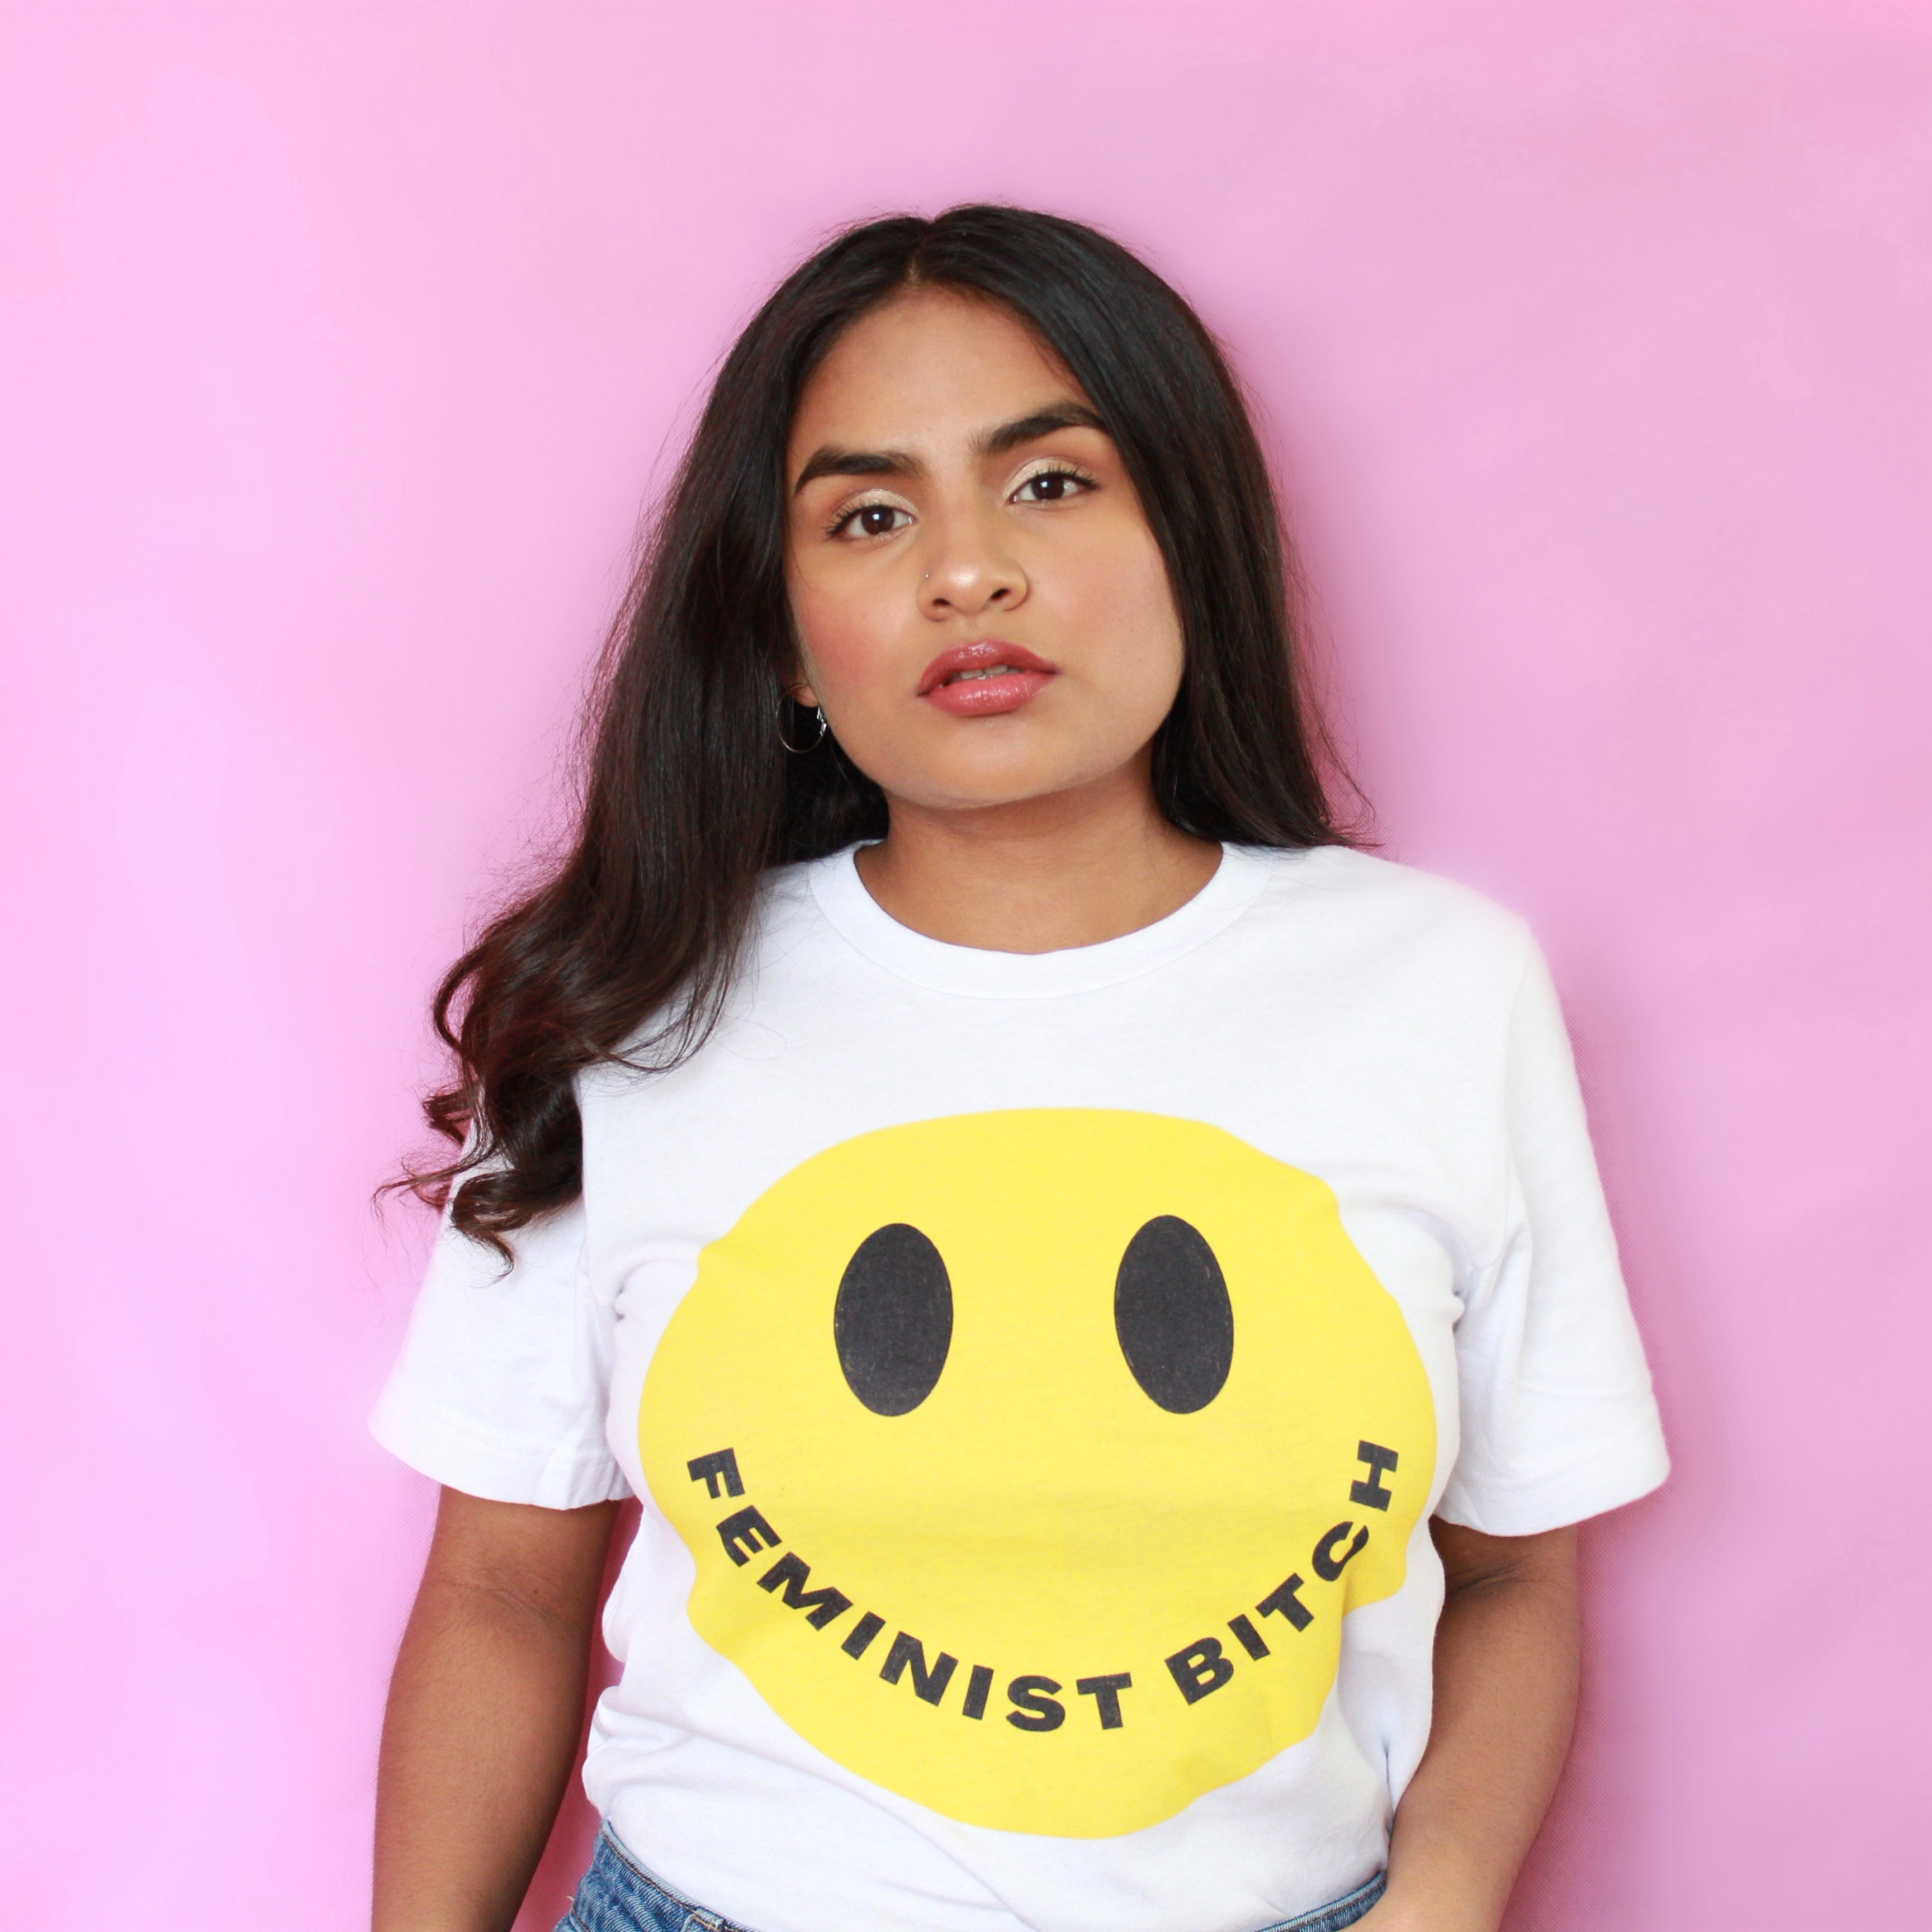 White feminist t-shirt conveying: "Feminist Bitch" with a yellow smiley face